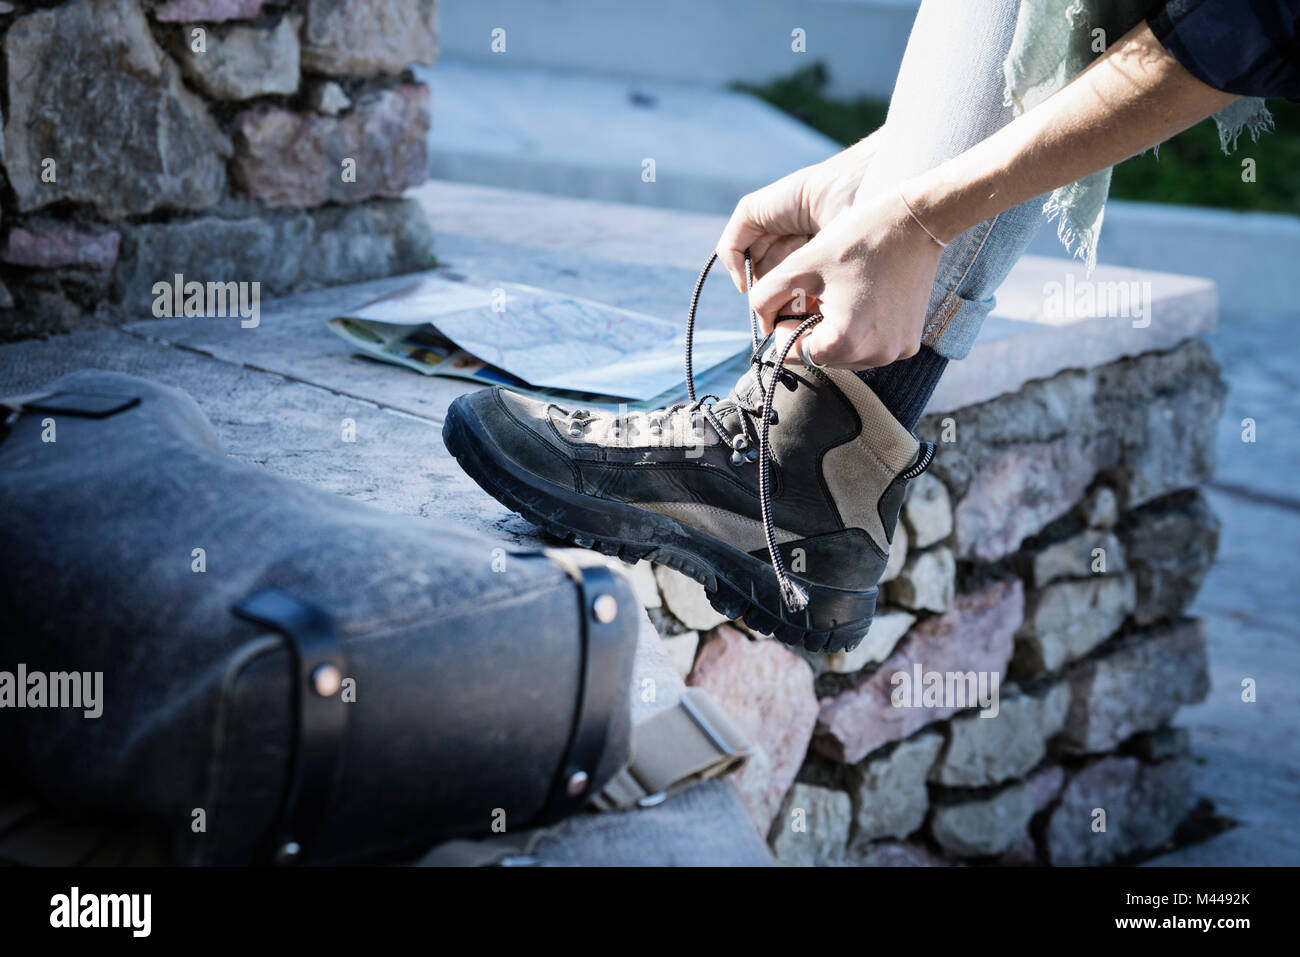 Cropped view of woman tying shoelace on walking boot Stock Photo